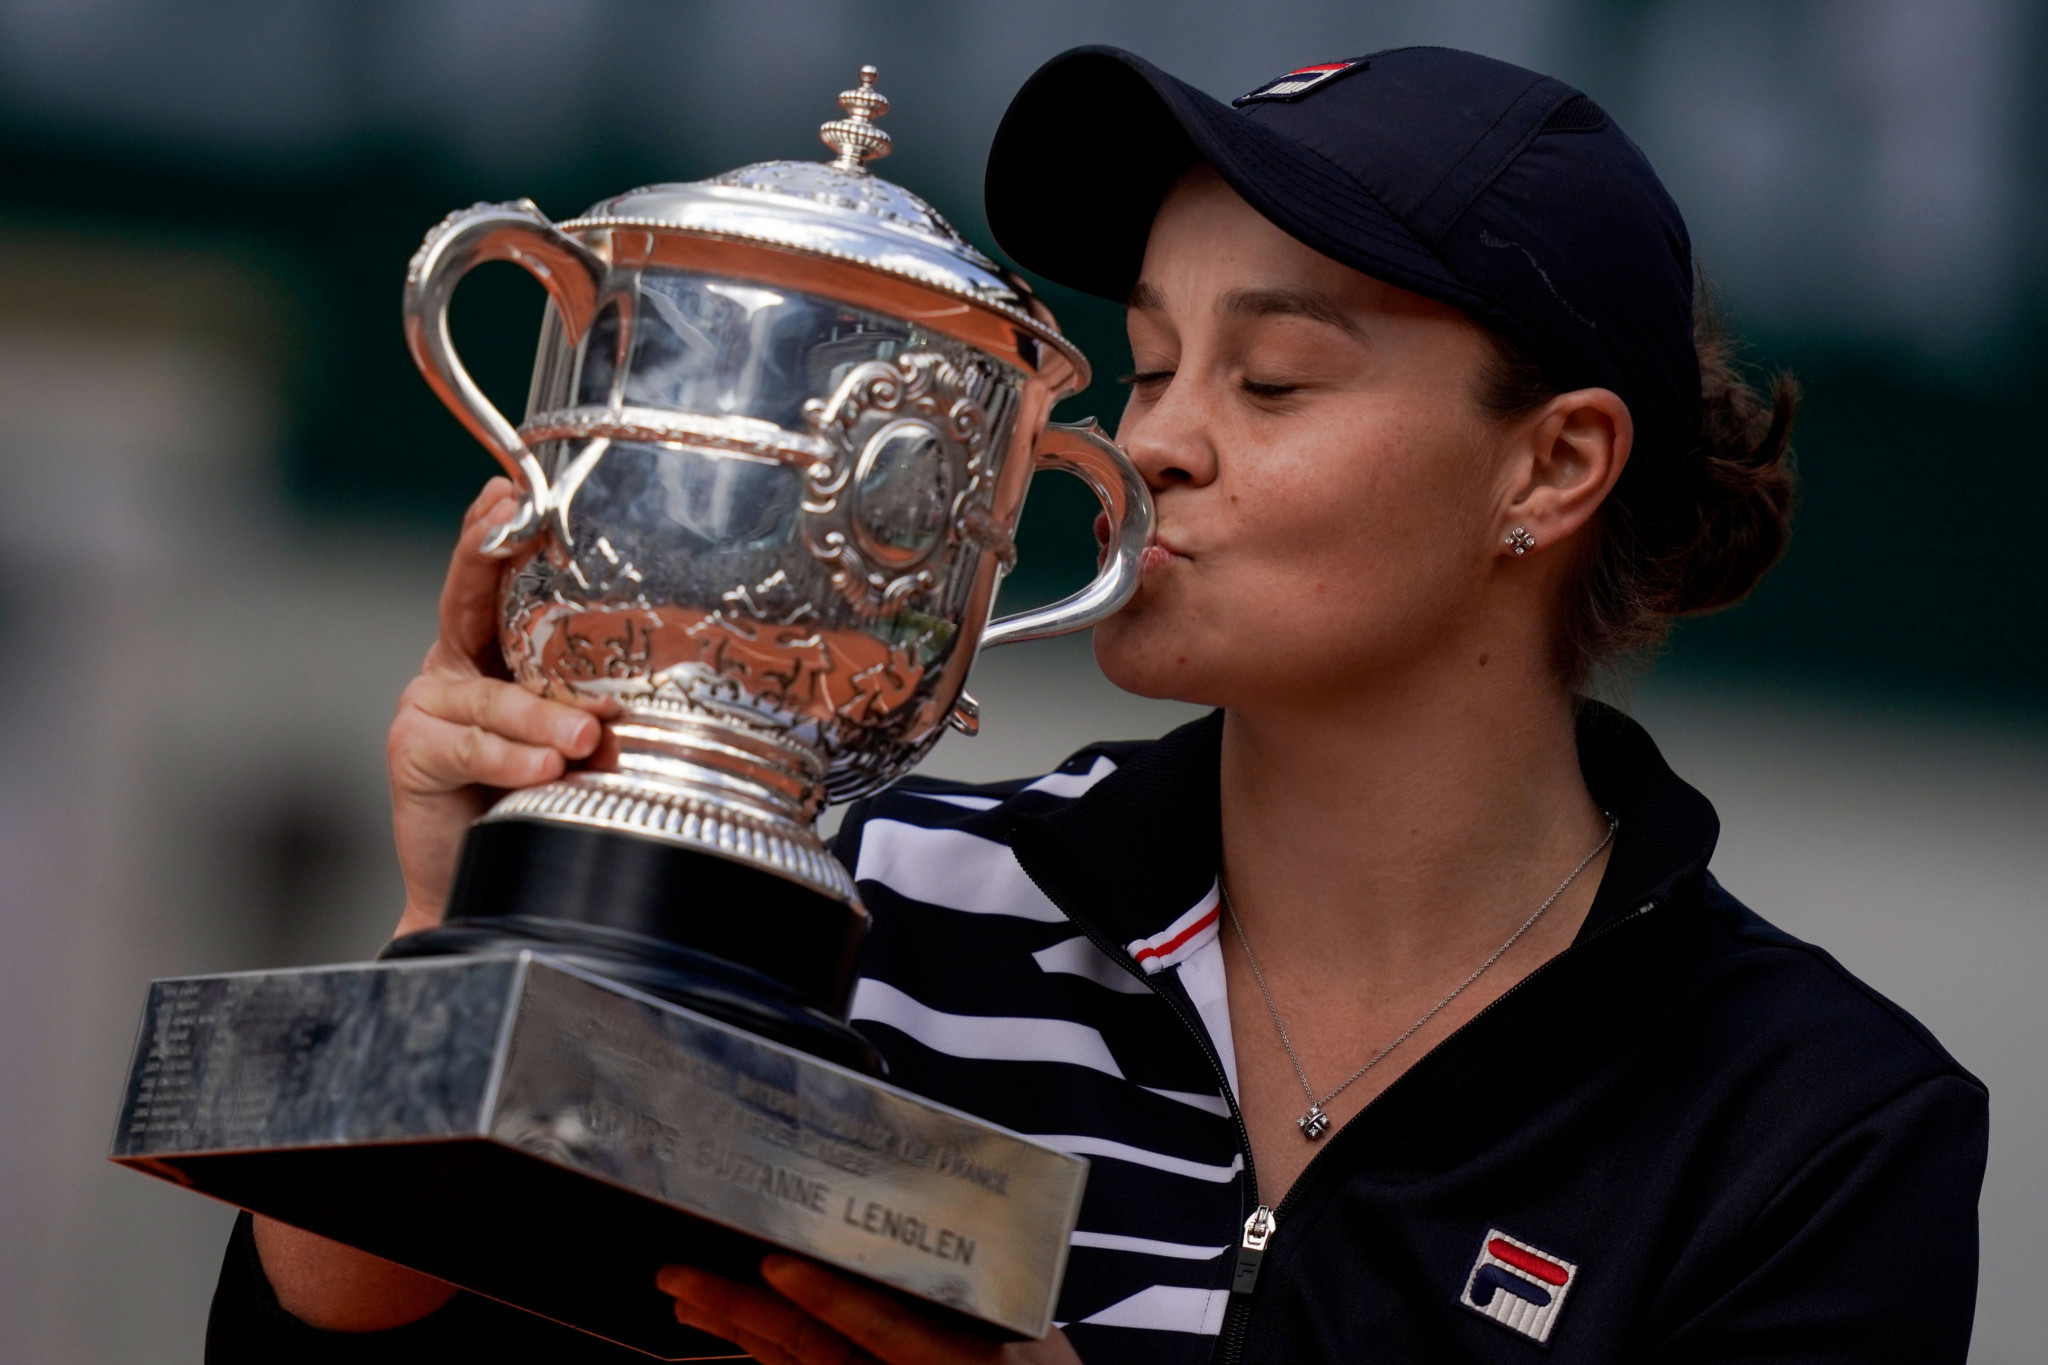 Australian Barty secures maiden Grand Slam title with emphatic victory